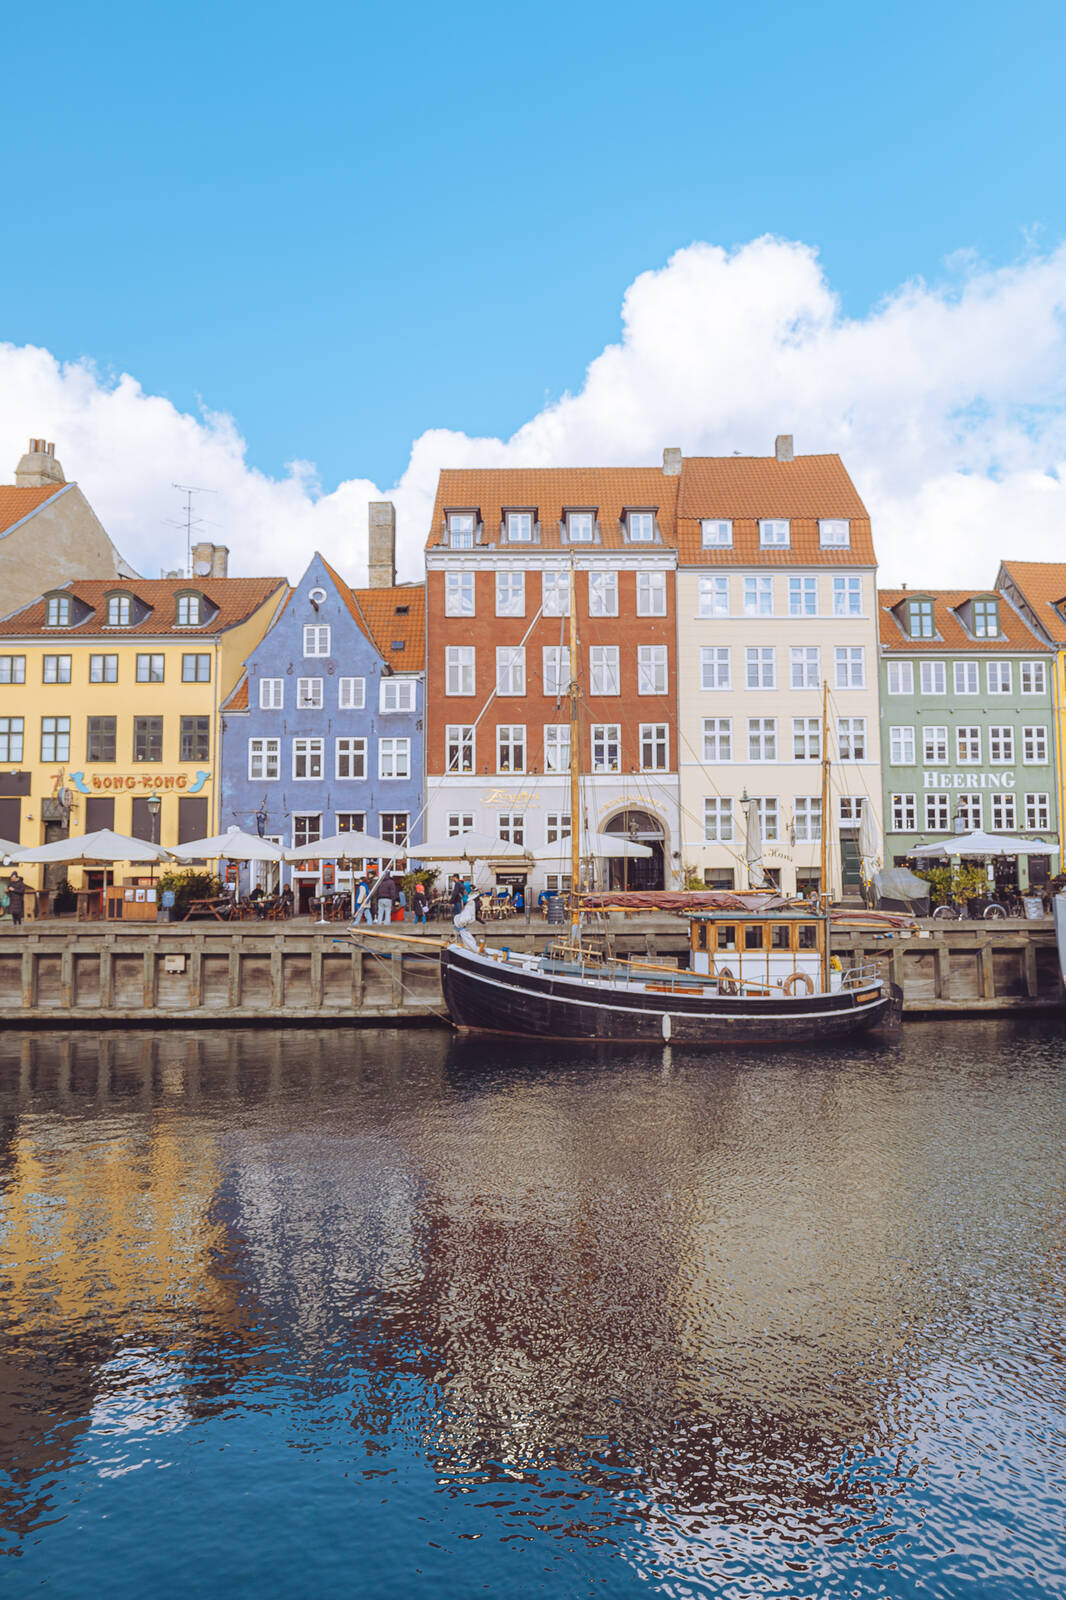 Image of Nyhavn Canal by Richard Davies